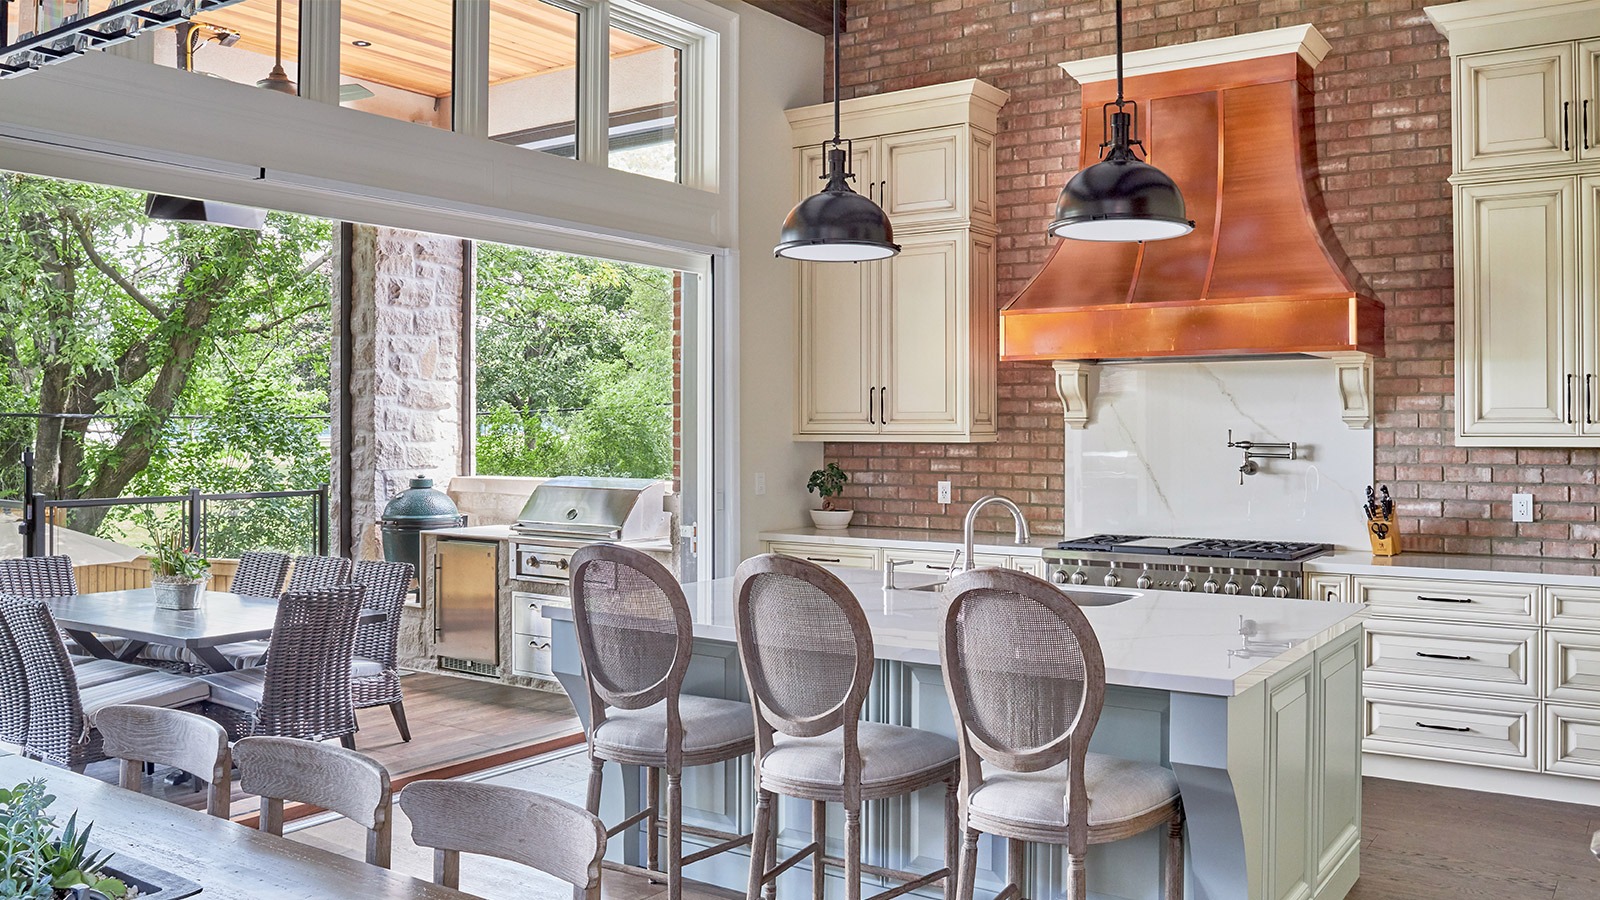 Kitchen with exposed brick, white cabinets and copper range hood.